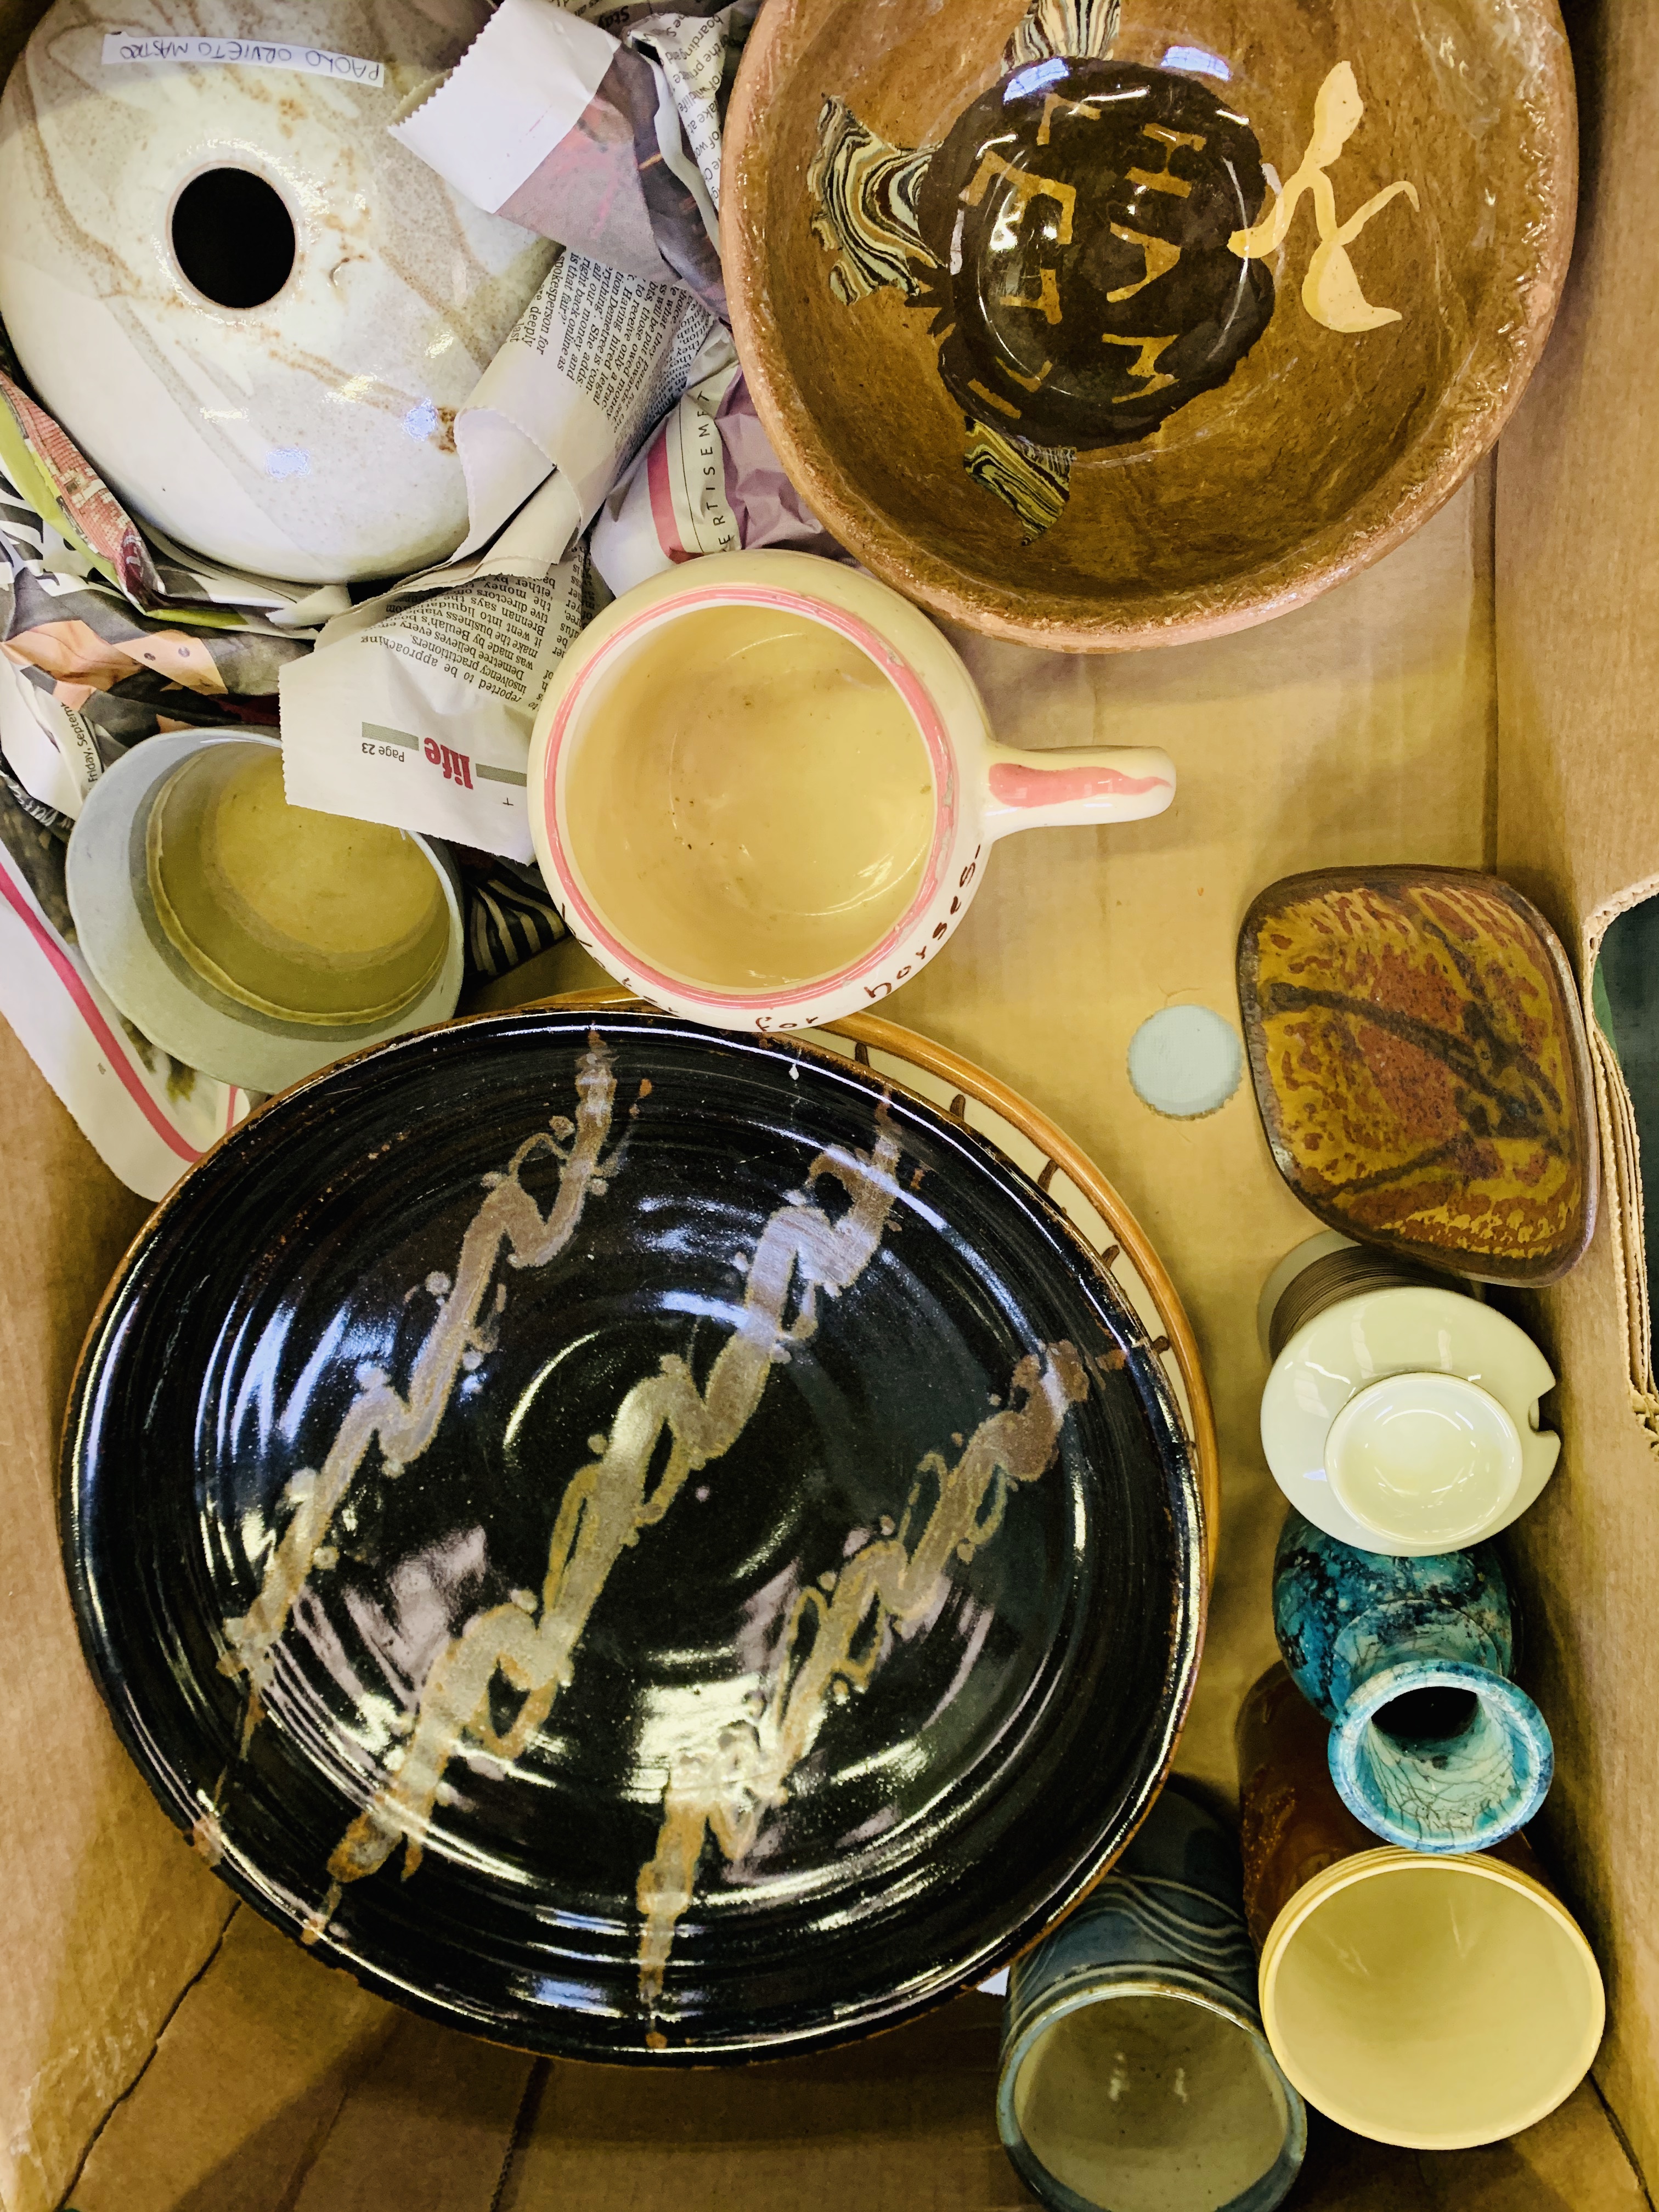 A collection of studio pottery.